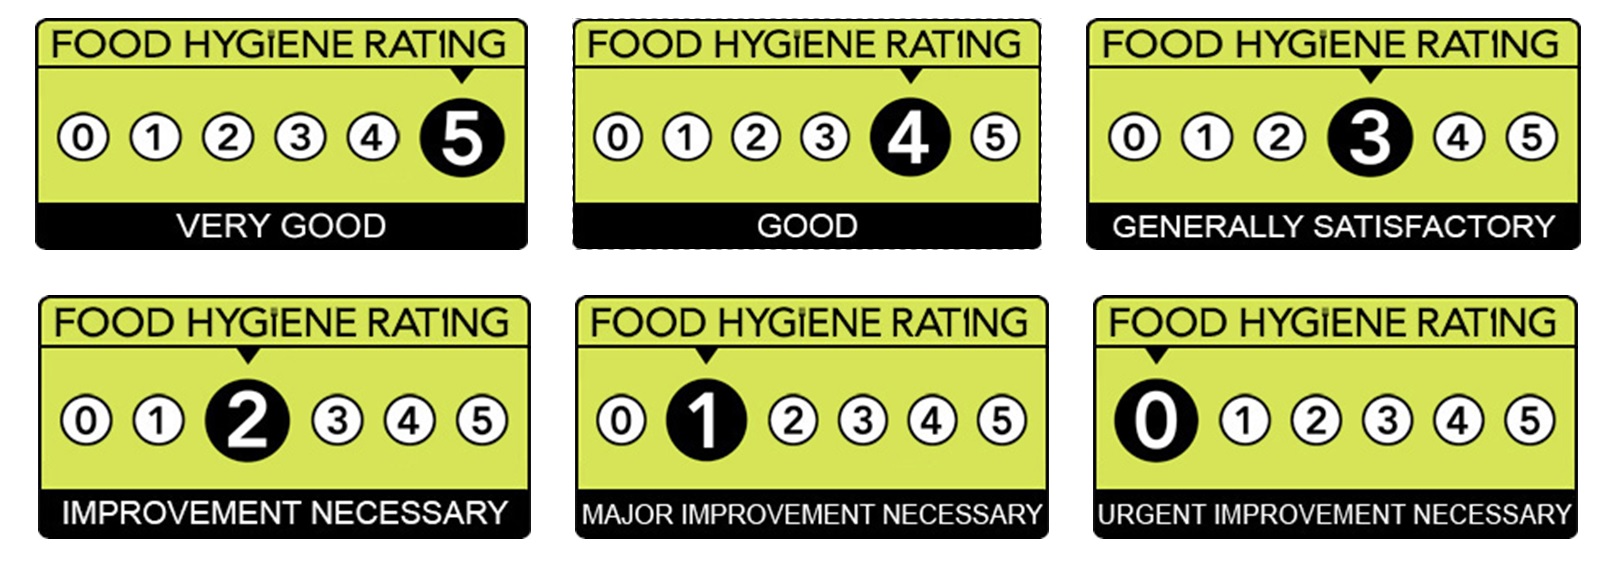 Food Hygiene Rating Score Posters (5 through to 0)